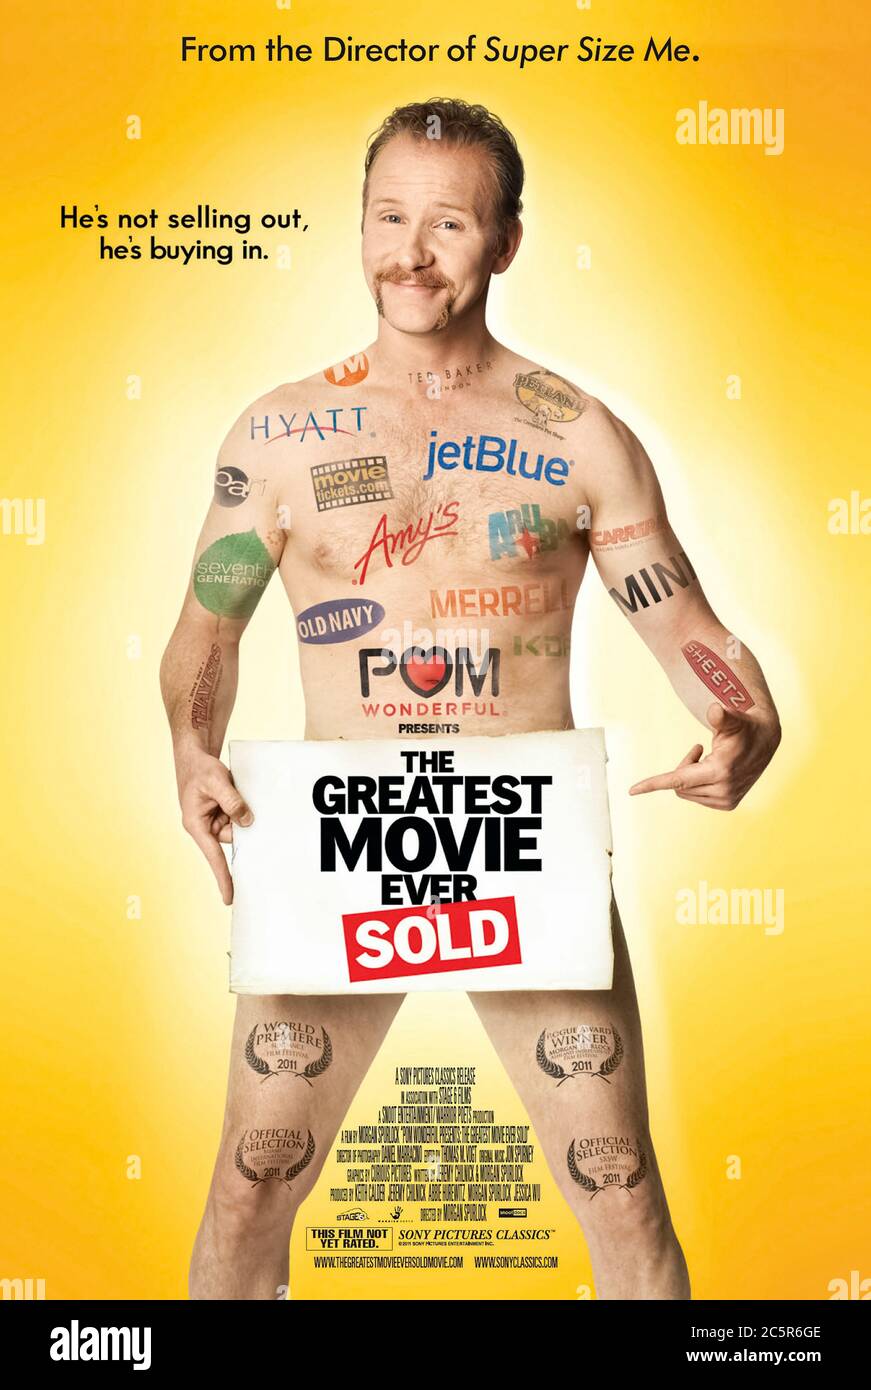 The Greatest Movie Ever Sold (2011) directed by Morgan Spurlock and starring J.J. Abrams, Peter Berg, Paul Brennan and Noam Chomsky. Documentary about advertising, branding and product placement financed entirely through those means. Stock Photo